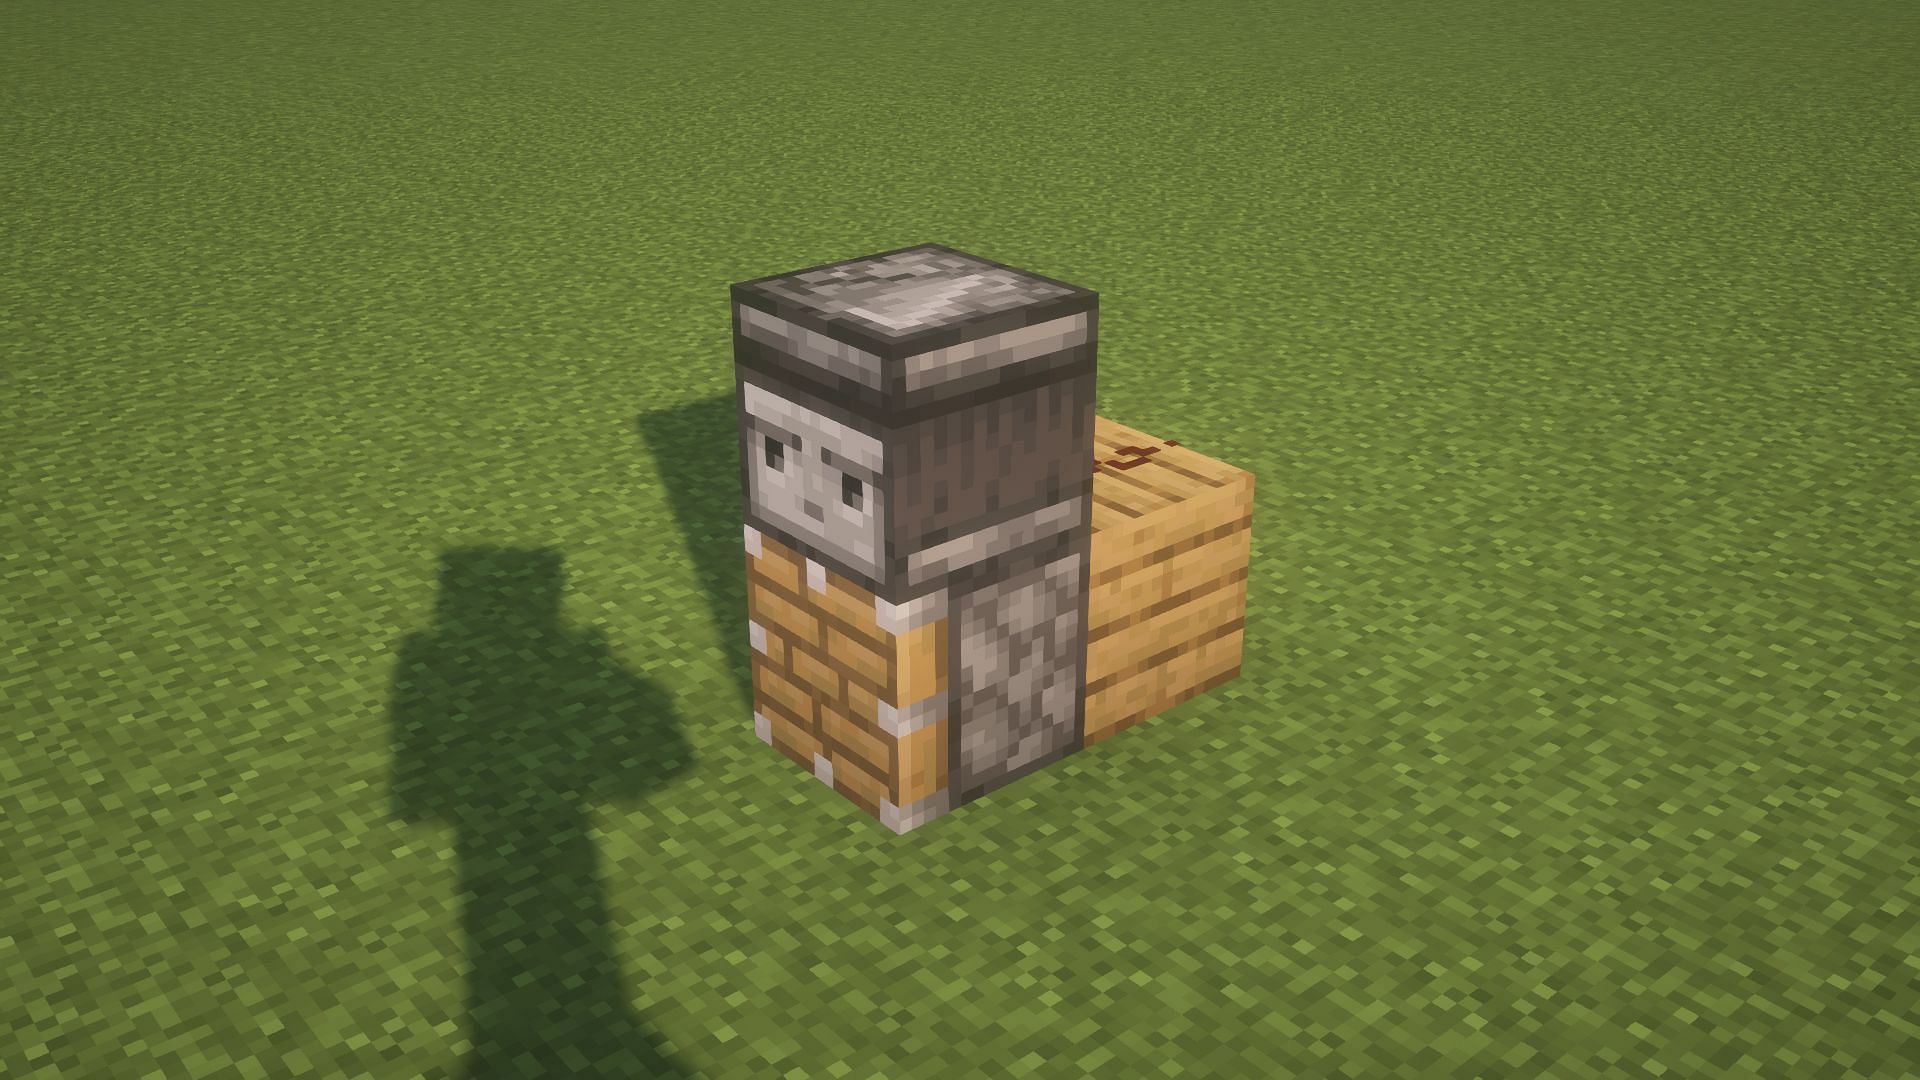 Redstone contraption with observer and piston (Image via Mojang)